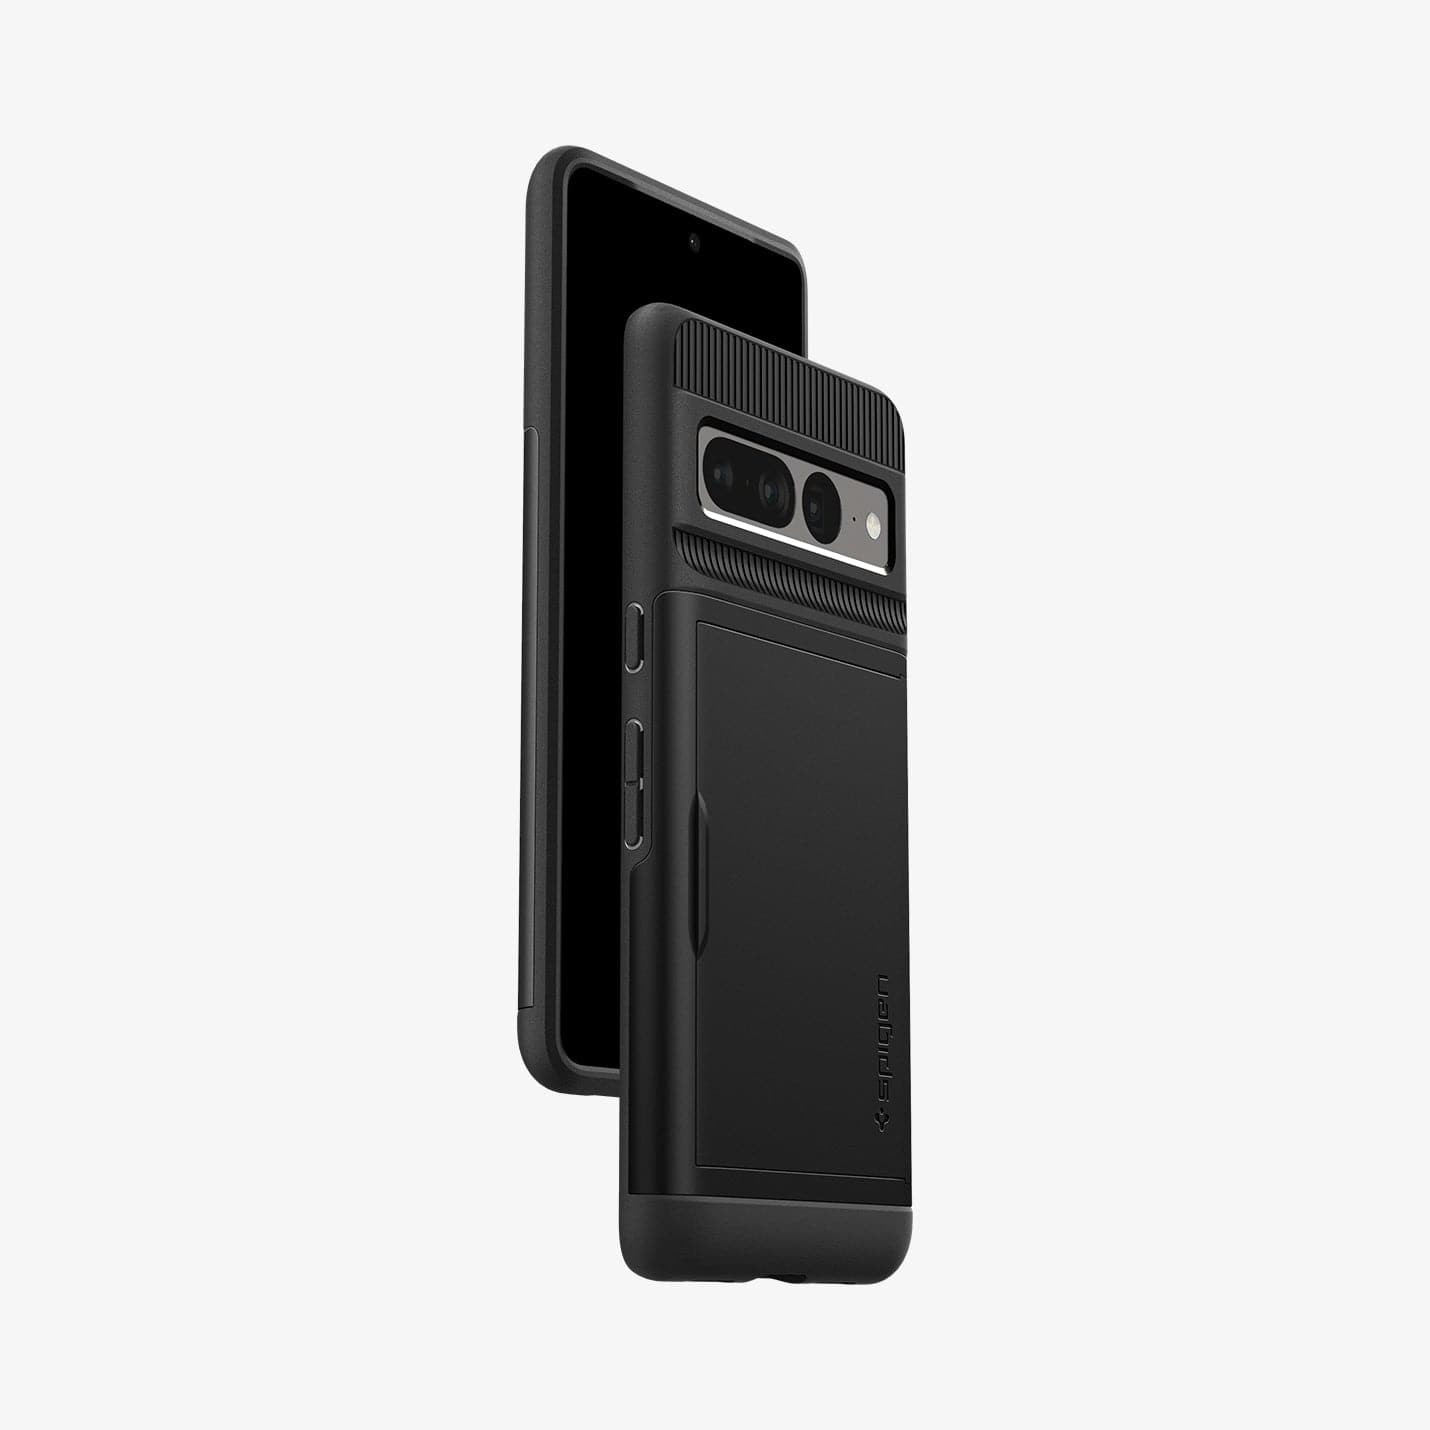 ACS04731 - Pixel 7 Pro Case Slim Armor CS in black showing the back, sides and partial front